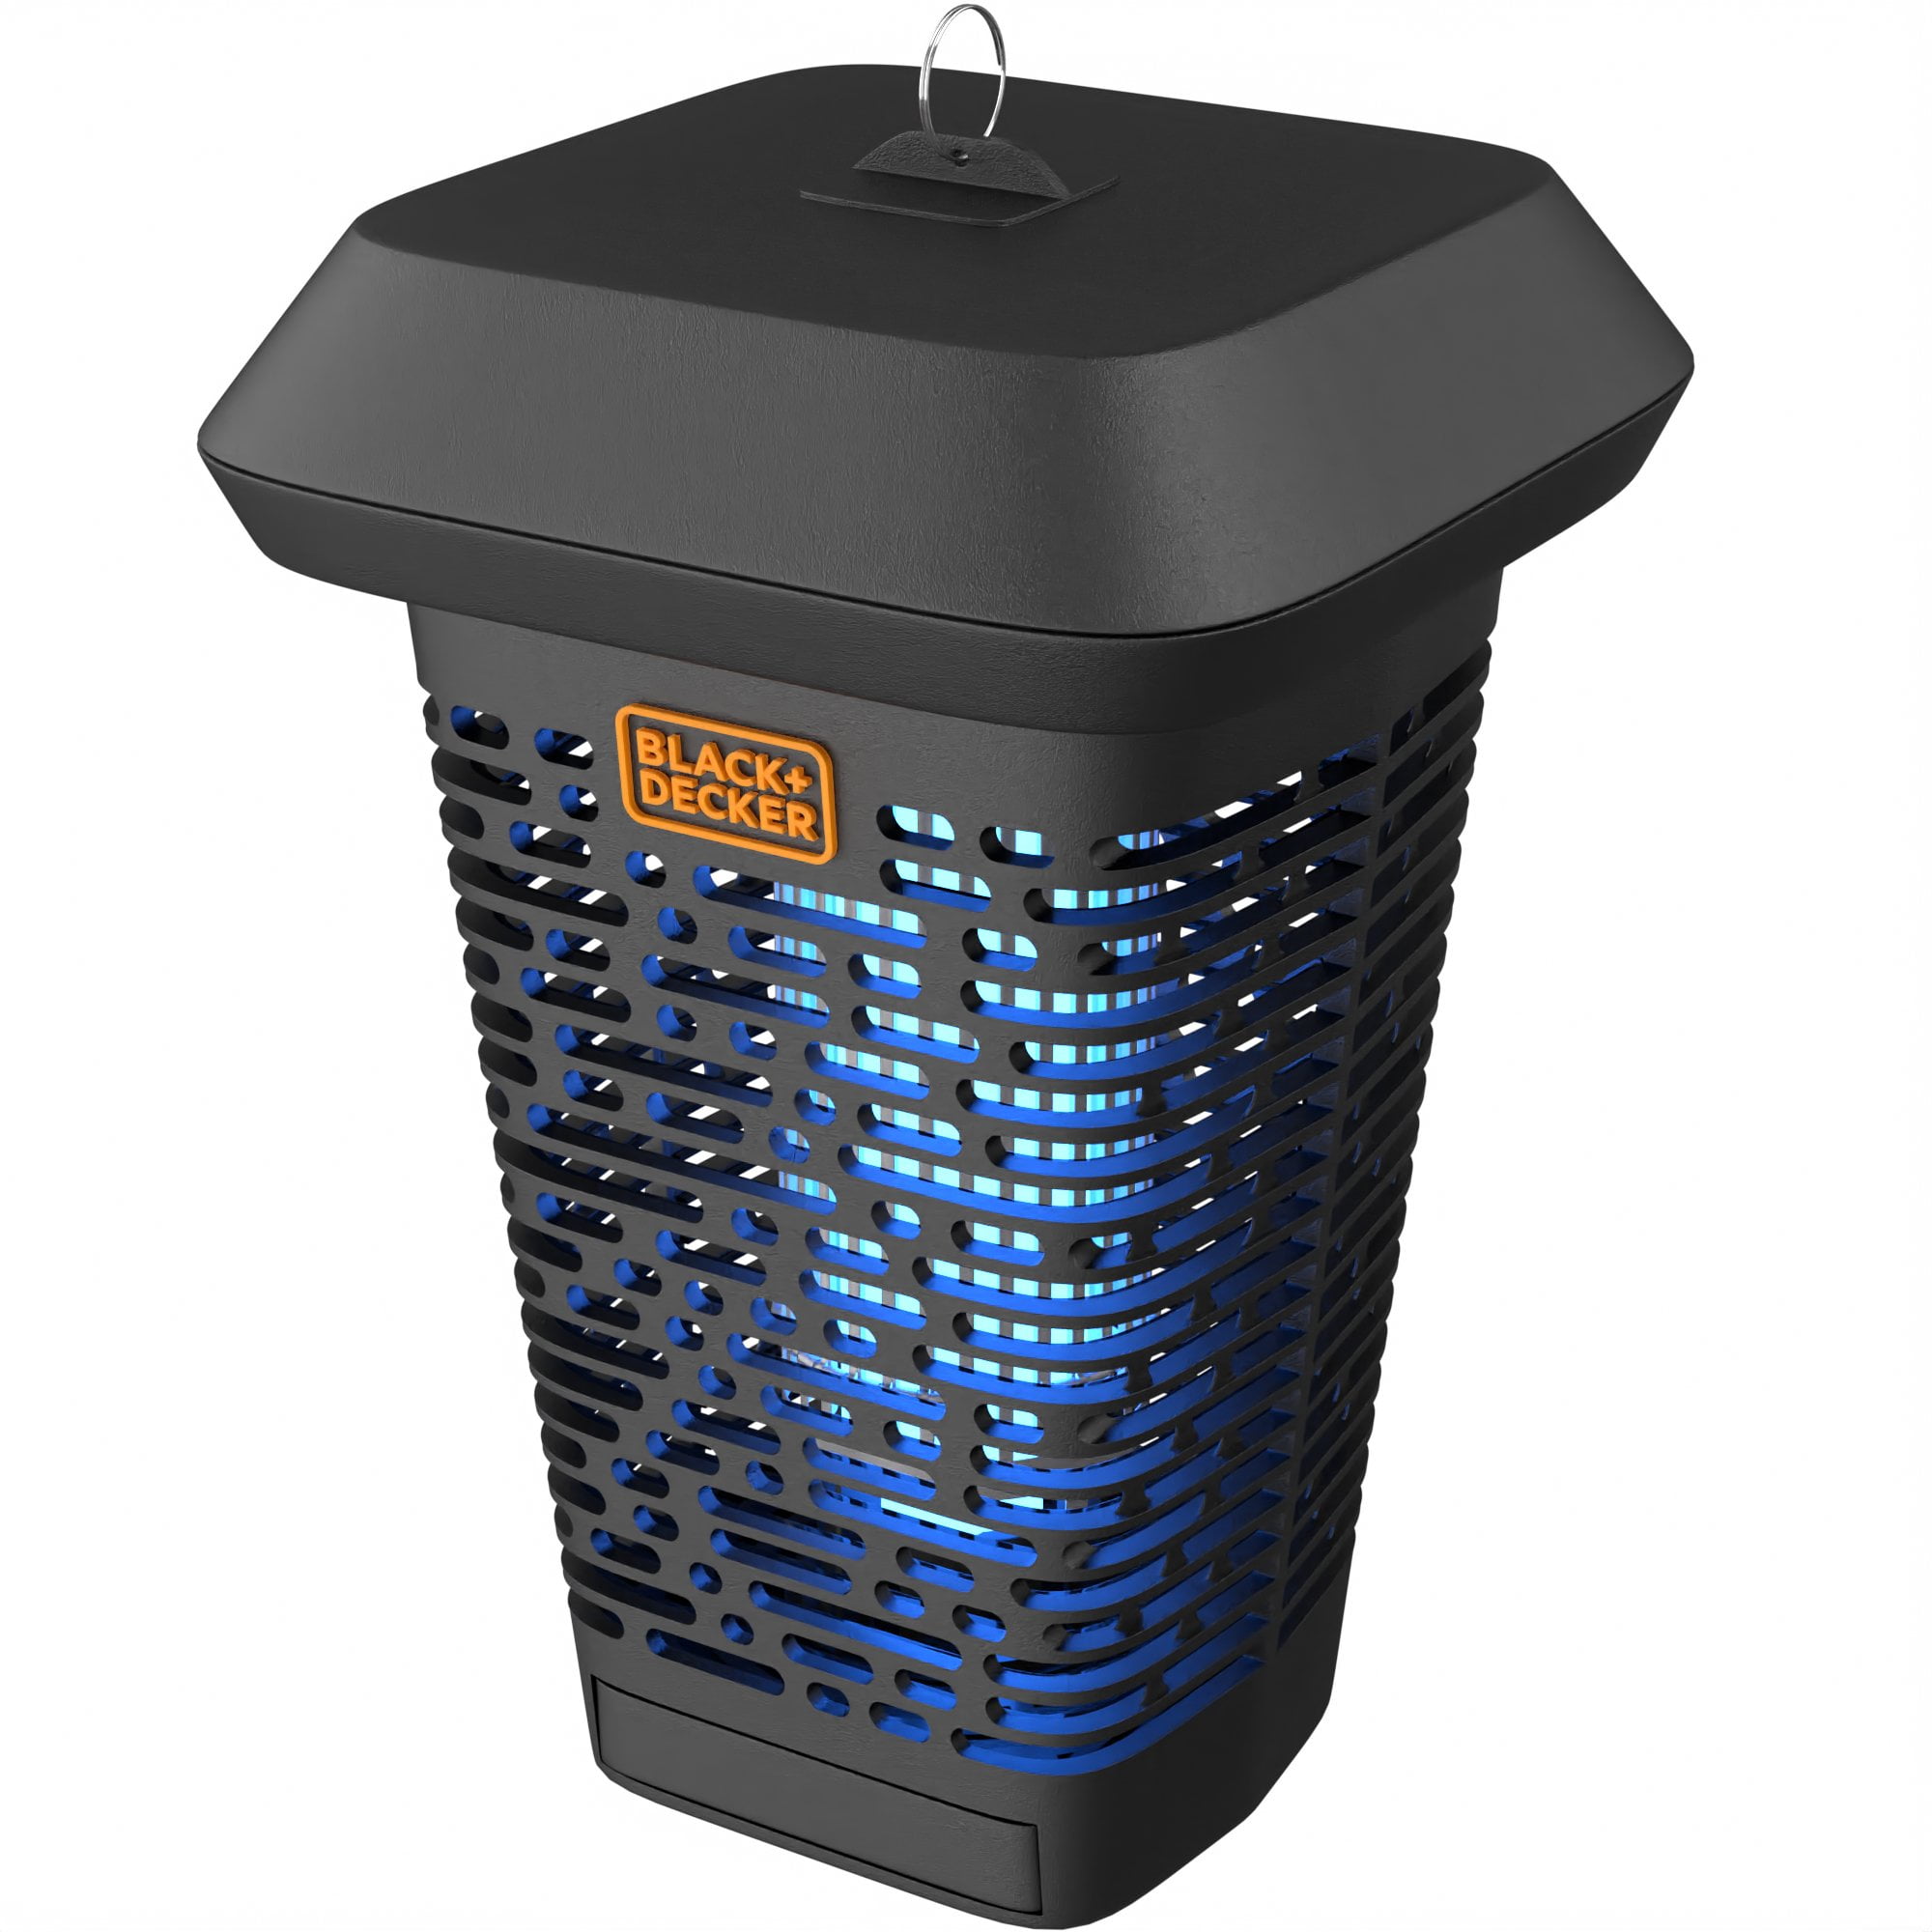 BLACK+DECKER Indoor/Outdoor Bug Zapper Mosquito and Fly Trap, Black - Yahoo  Shopping